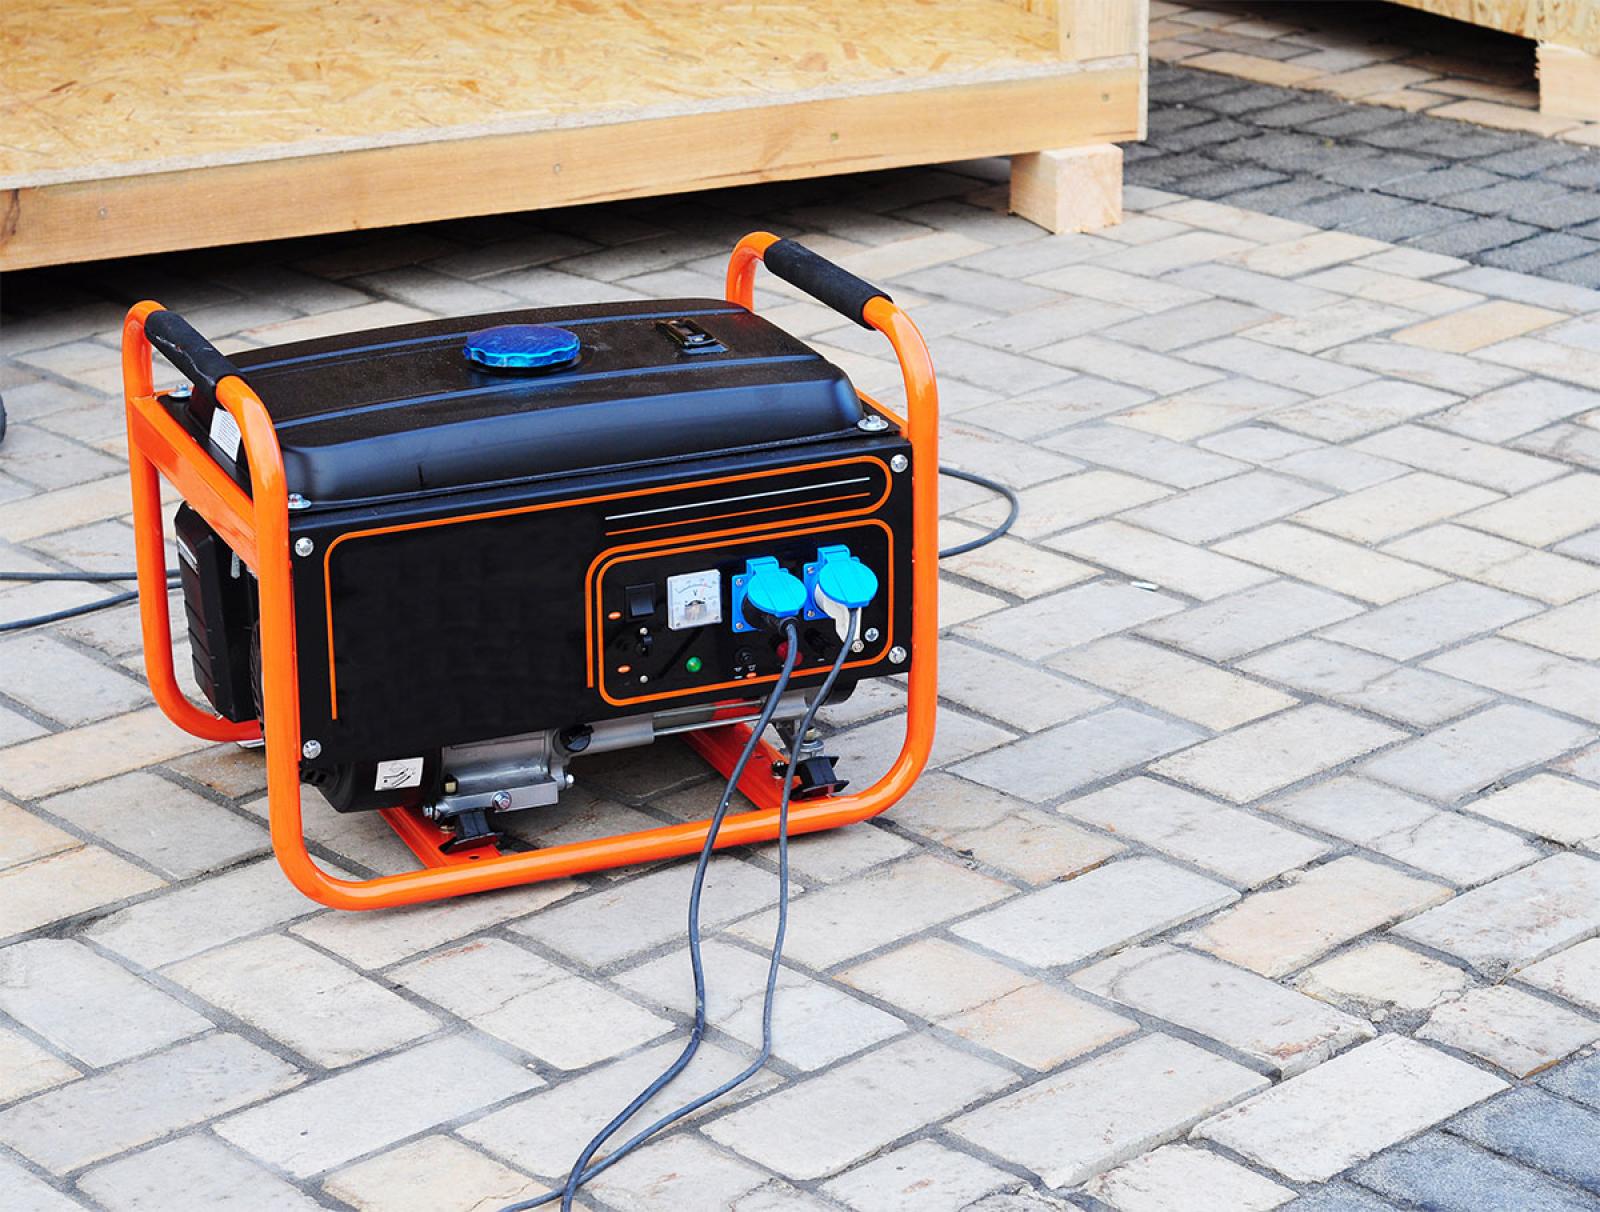 Reasons Every Household Should Have a Portable Generator